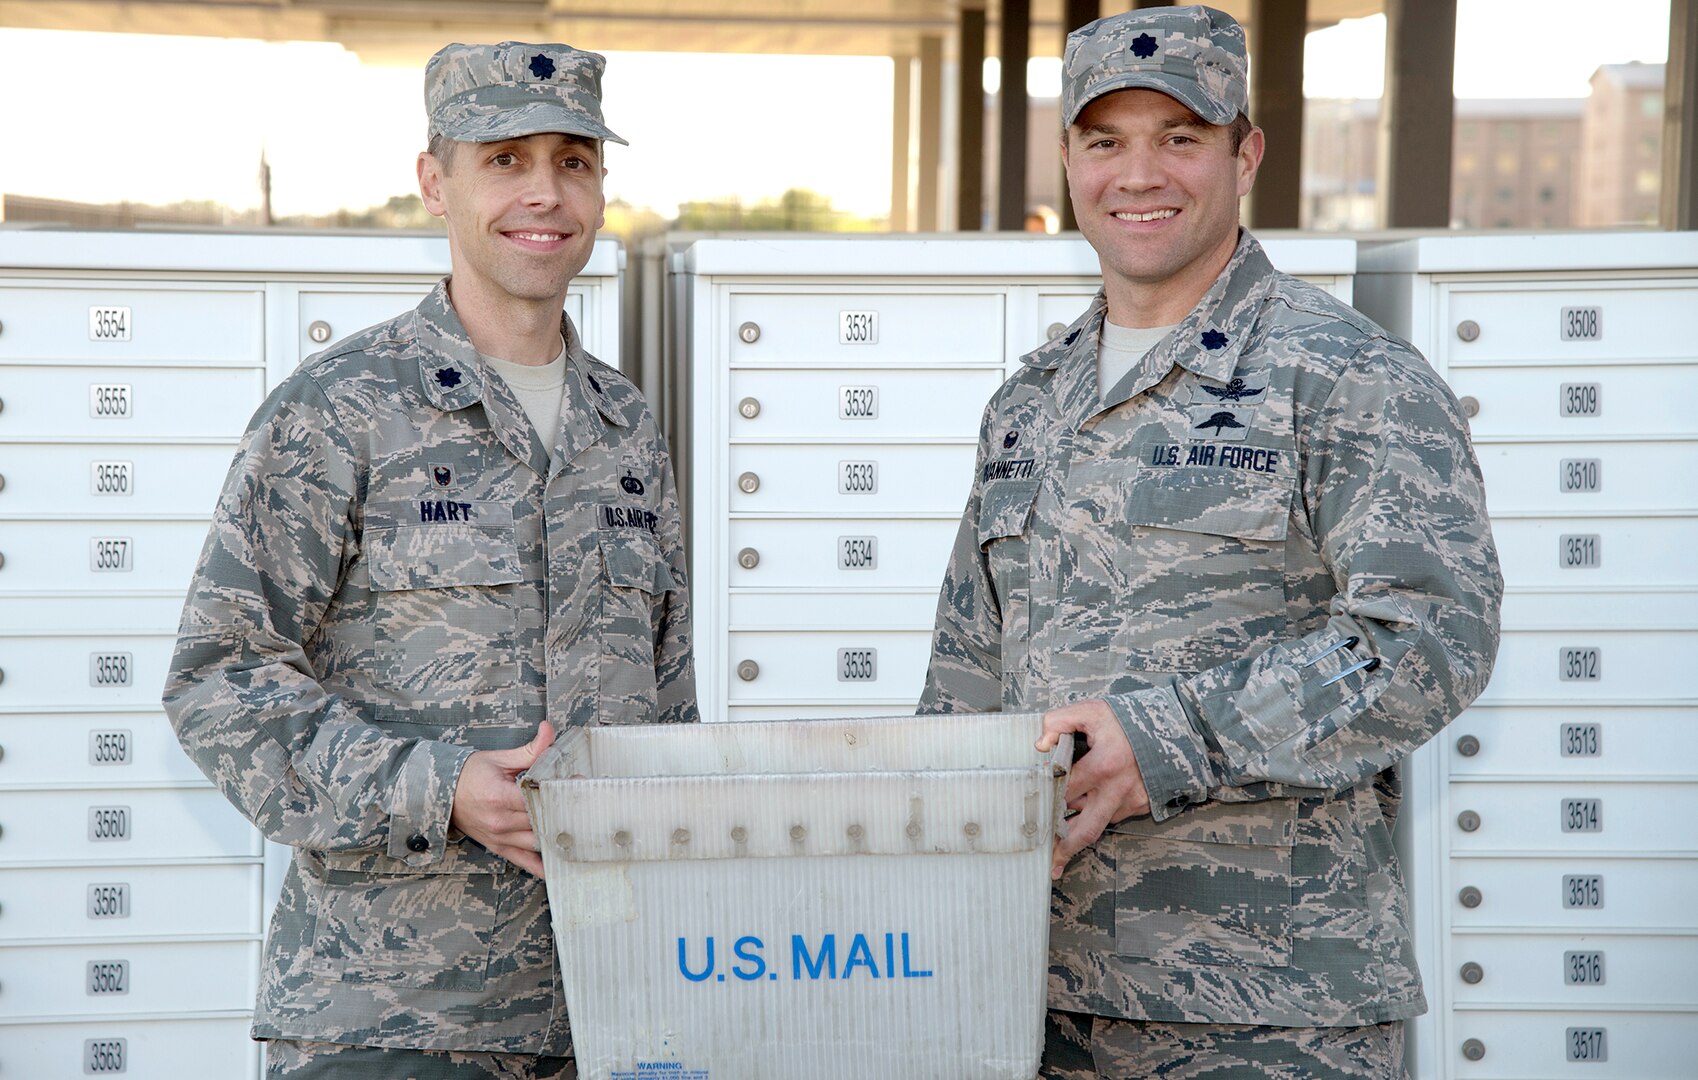 Lt. Col. Hart (left), commander, 802nd Force Support Squadron, and Lt. Col. Robert G. Giovannetti (right), 502nd Communications Squadron, pose outside the student mail center at Joint Base San Antonio-Fort Sam Houston Nov. 27 after JBSA postal operations transferred to the direction of the 802d FSS. They had been a part of the 502nd Communications Squadron since 1993 and will be realigned under the 802nd FSS.